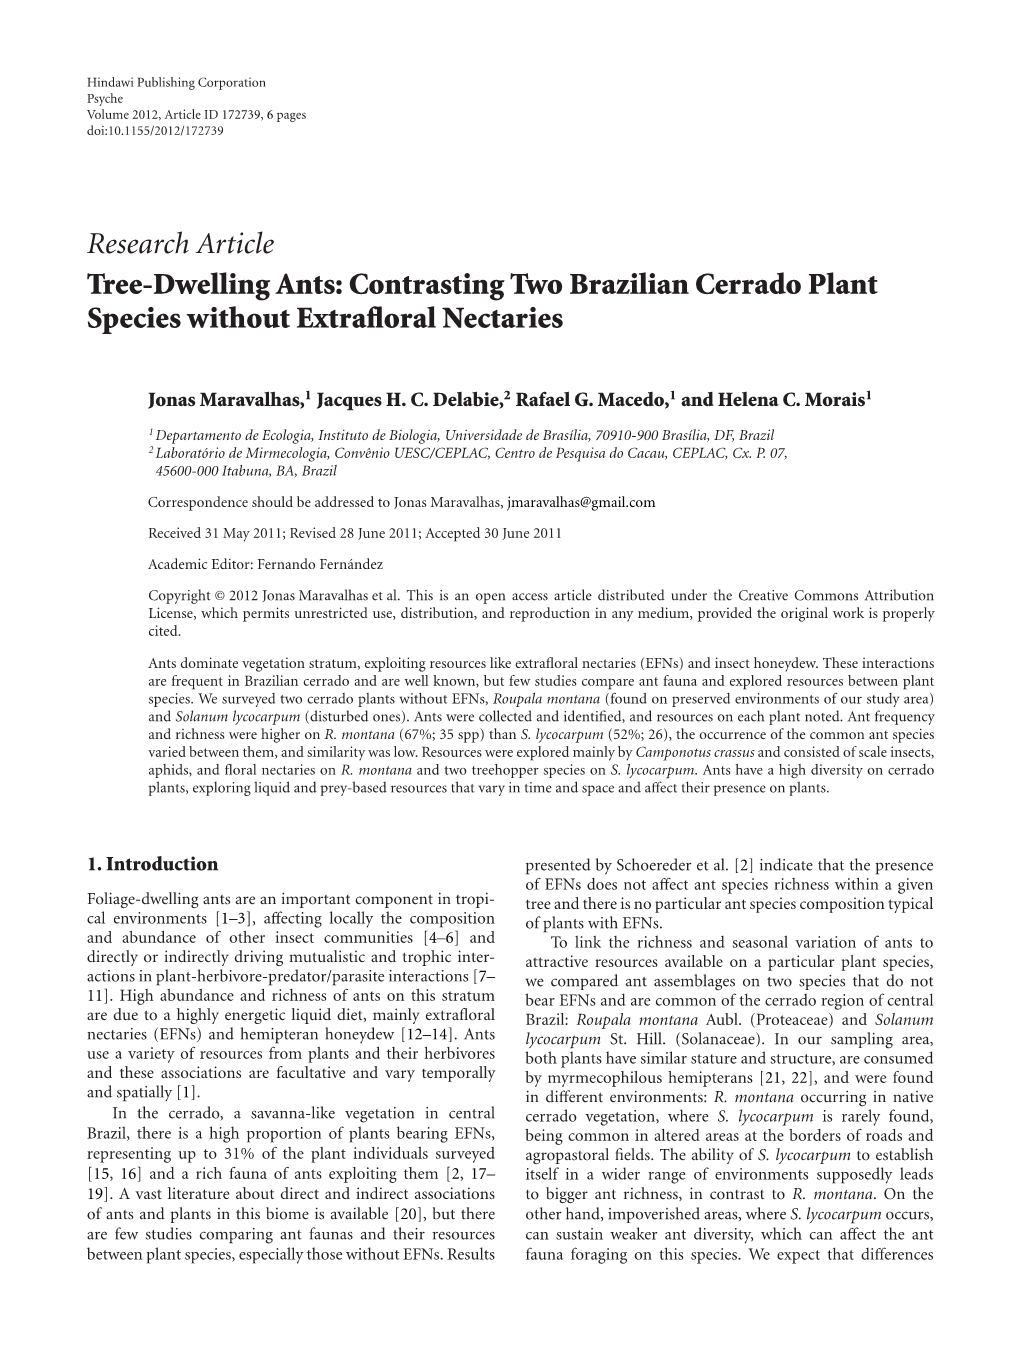 Tree-Dwelling Ants: Contrasting Two Brazilian Cerrado Plant Species Without Extraﬂoral Nectaries